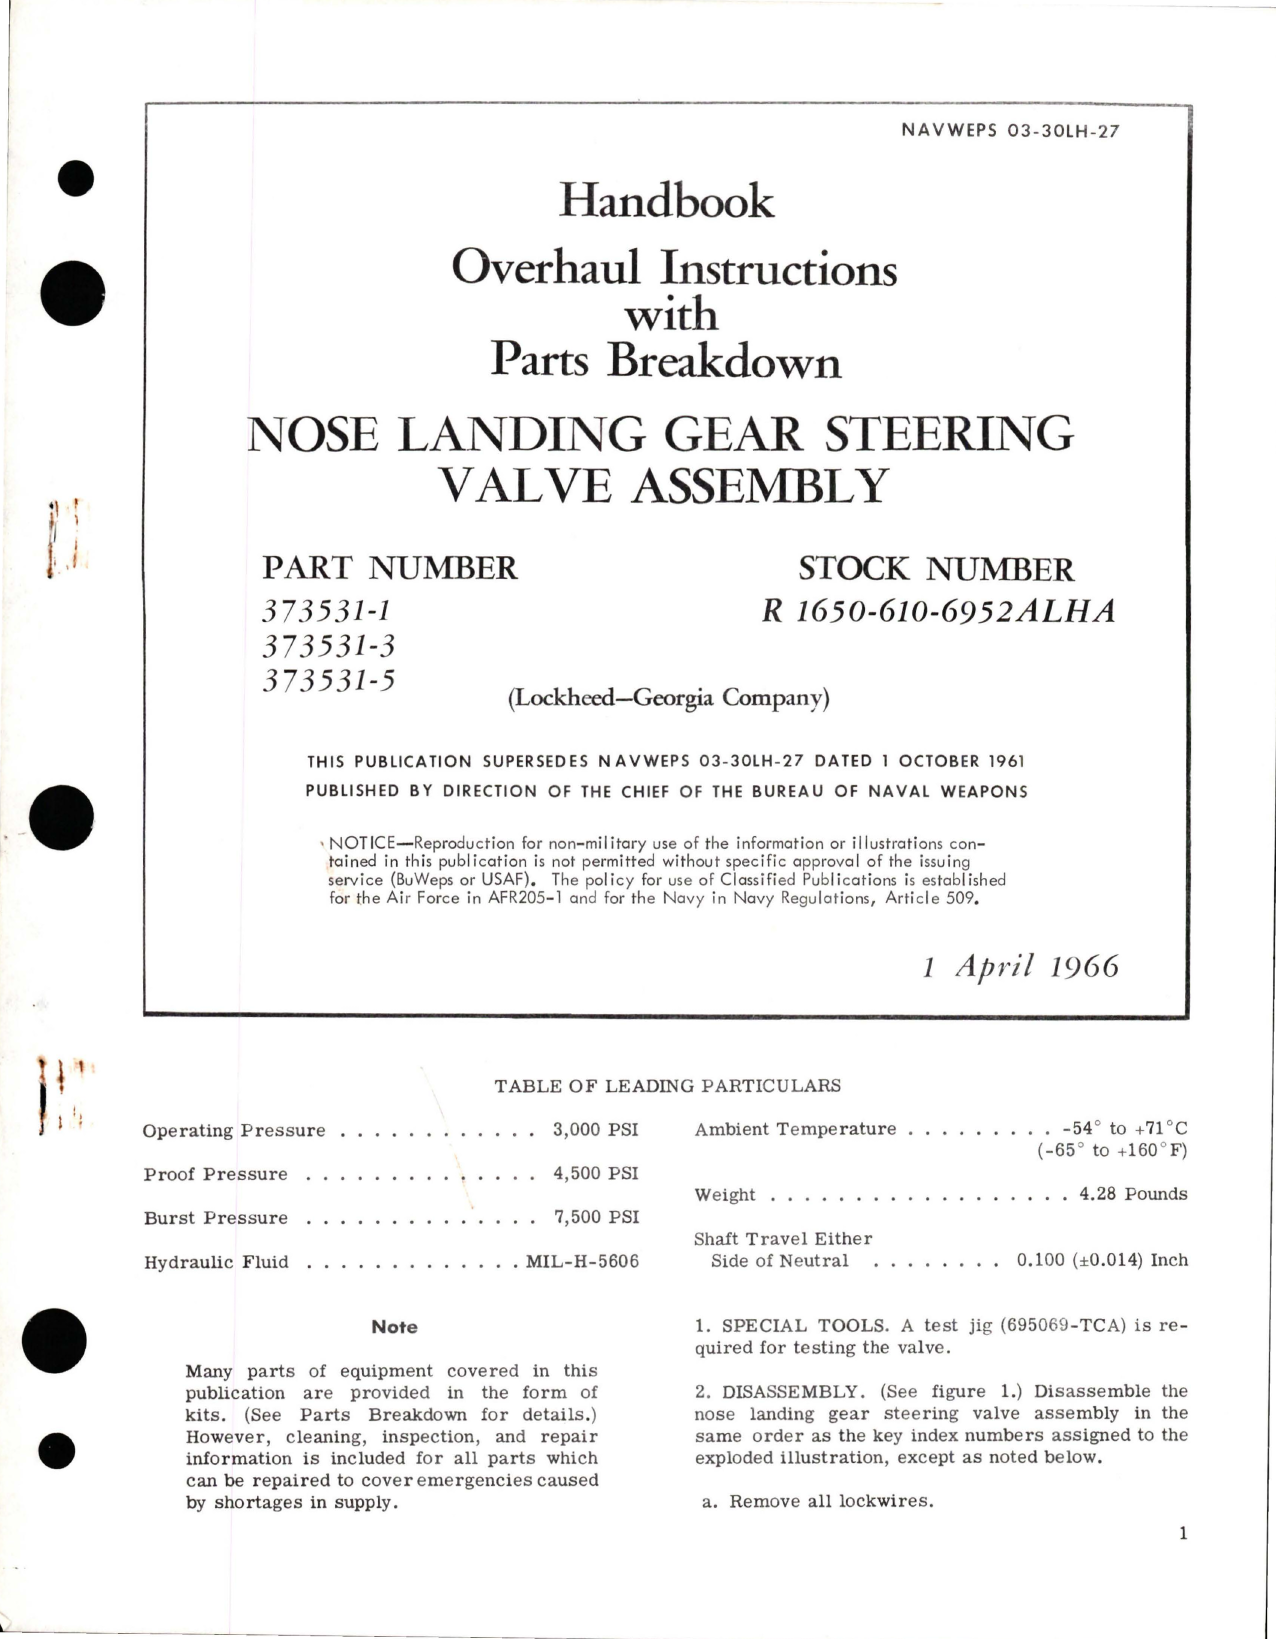 Sample page 1 from AirCorps Library document: Overhaul Instructions with Parts Breakdown for Nose Landing Gear Steering Valve Assembly - Parts 373531-1, 373531-3, and 373531-5